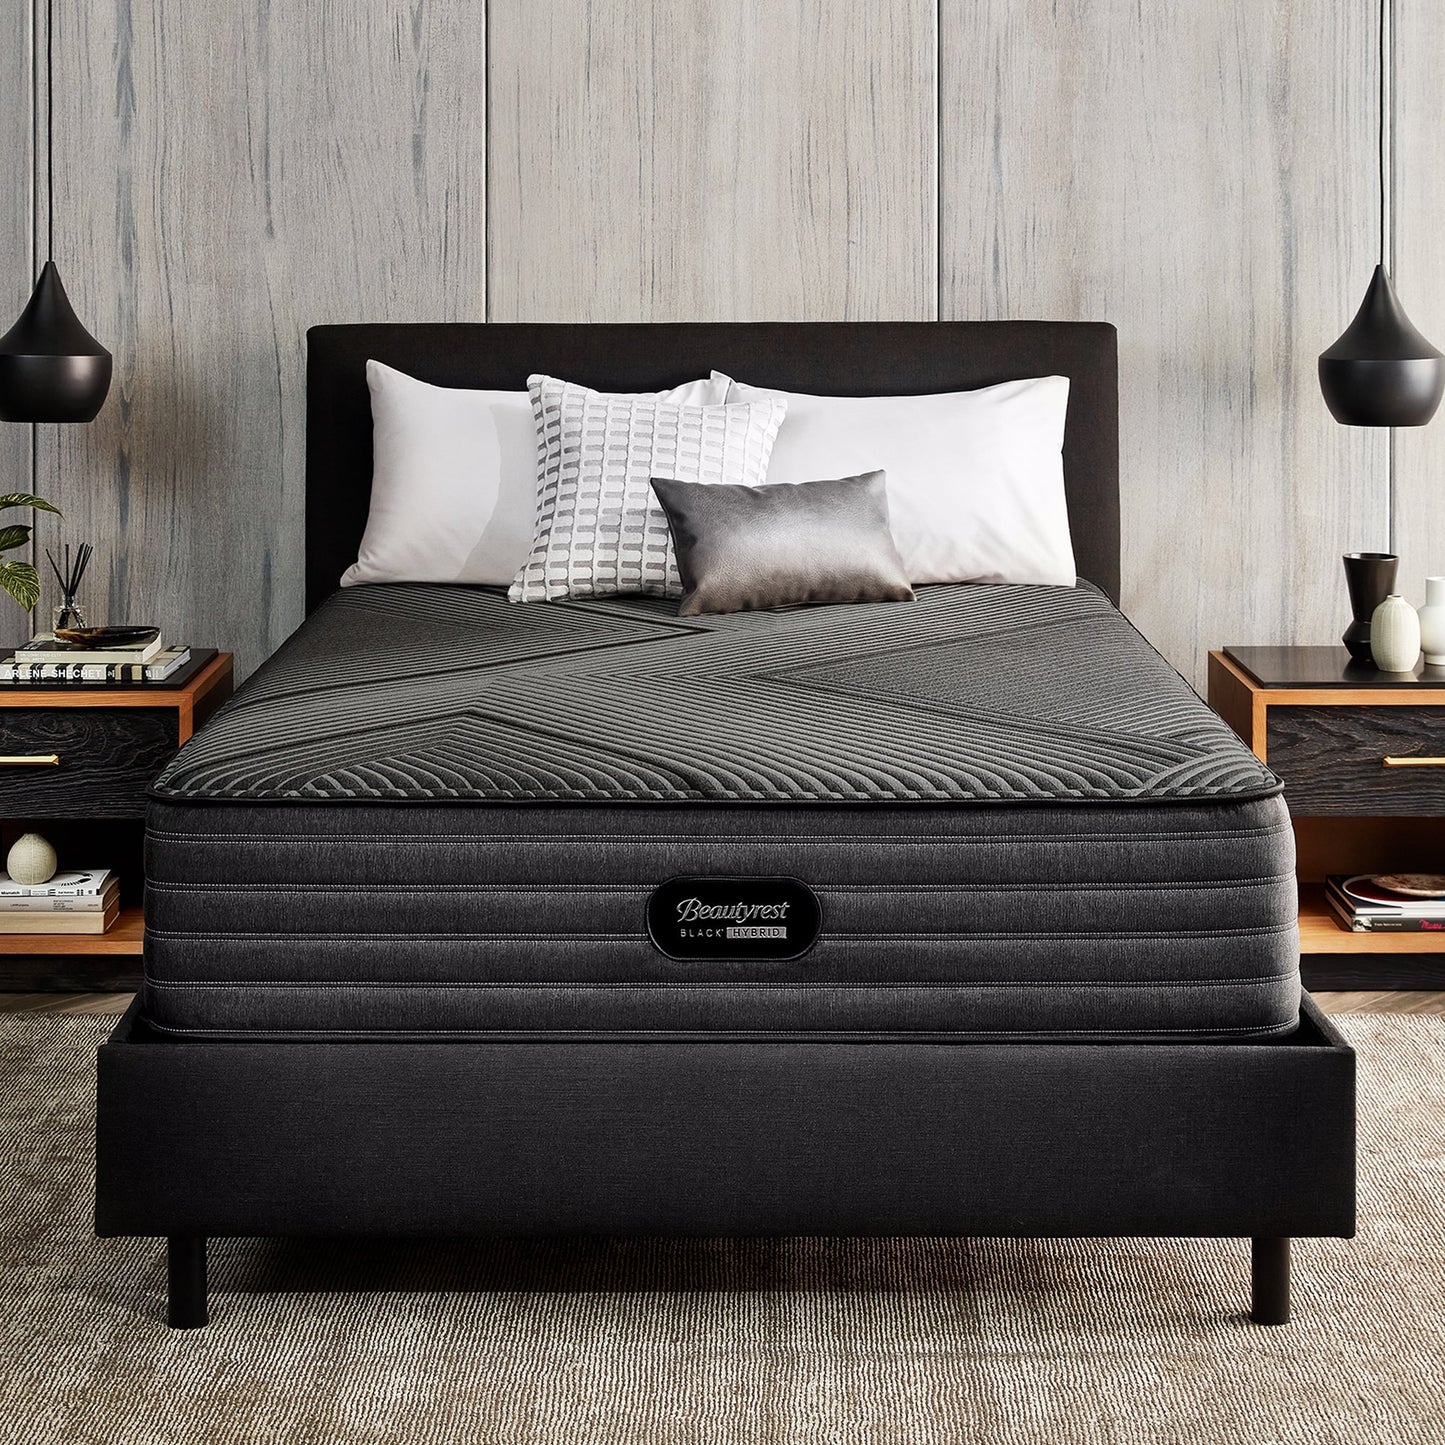 Beautyrest Black Hybrid L-Class Medium Mattress On Bed Frame In Bedroom Front View